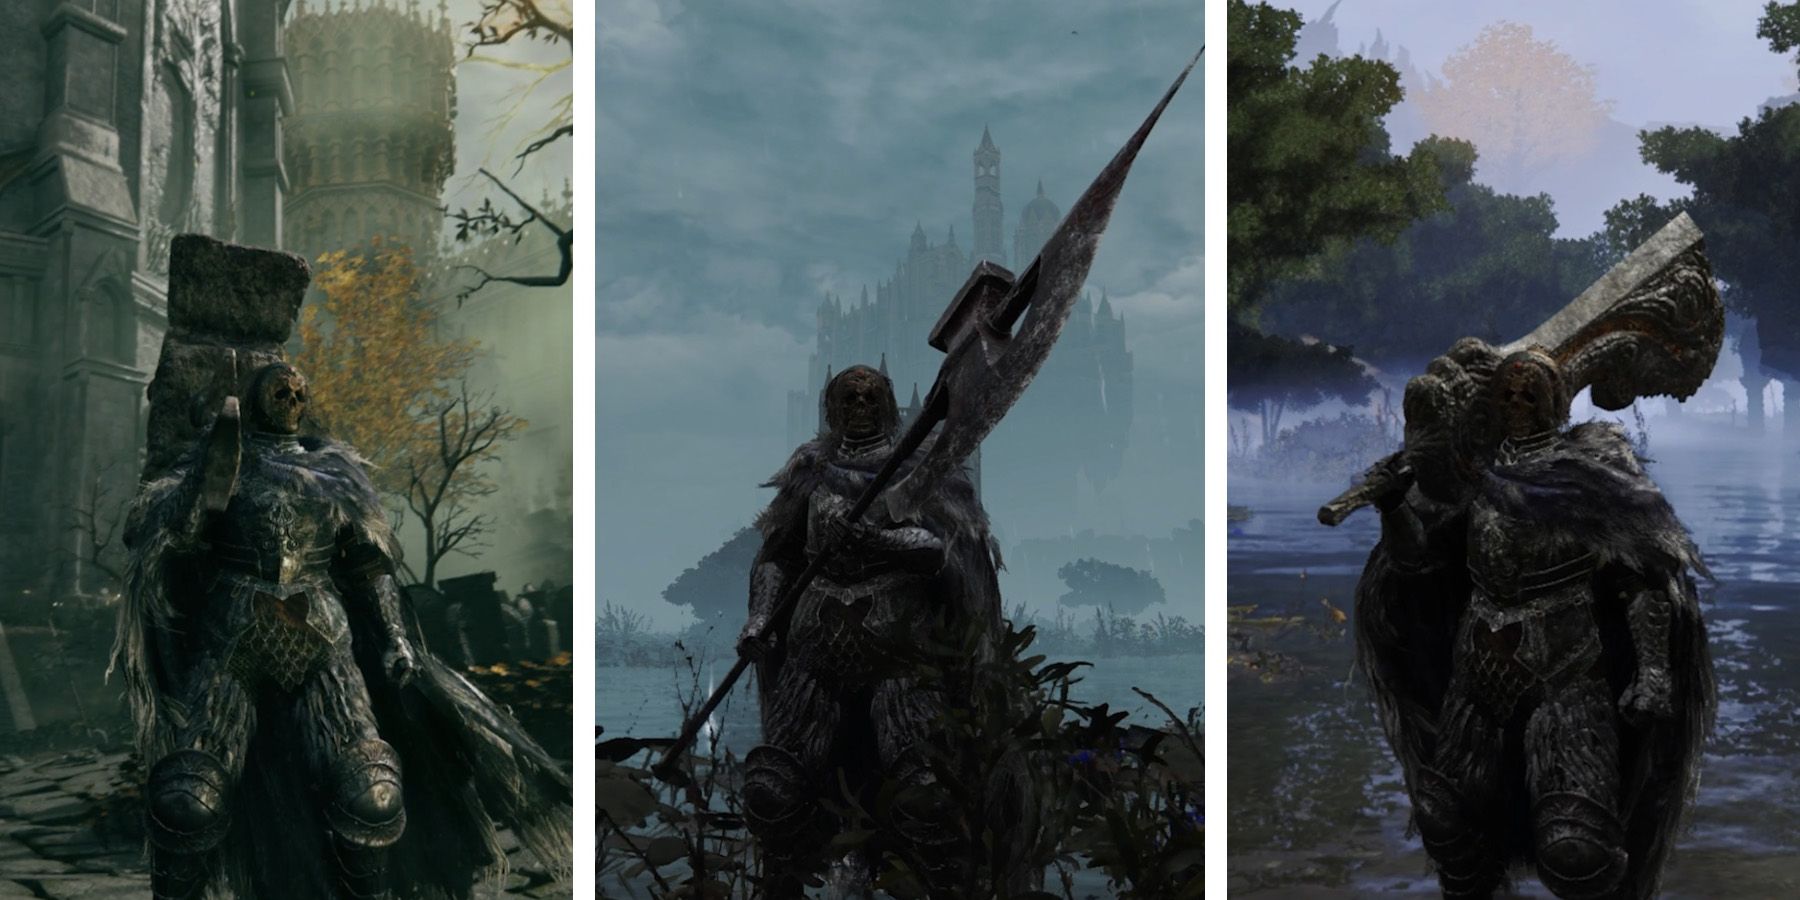 The 8 Best Elden Ring Strength Weapons Ranked Thumbnail, three pictures side by side of Elden Ring Player Characters holding three of the listed weapons